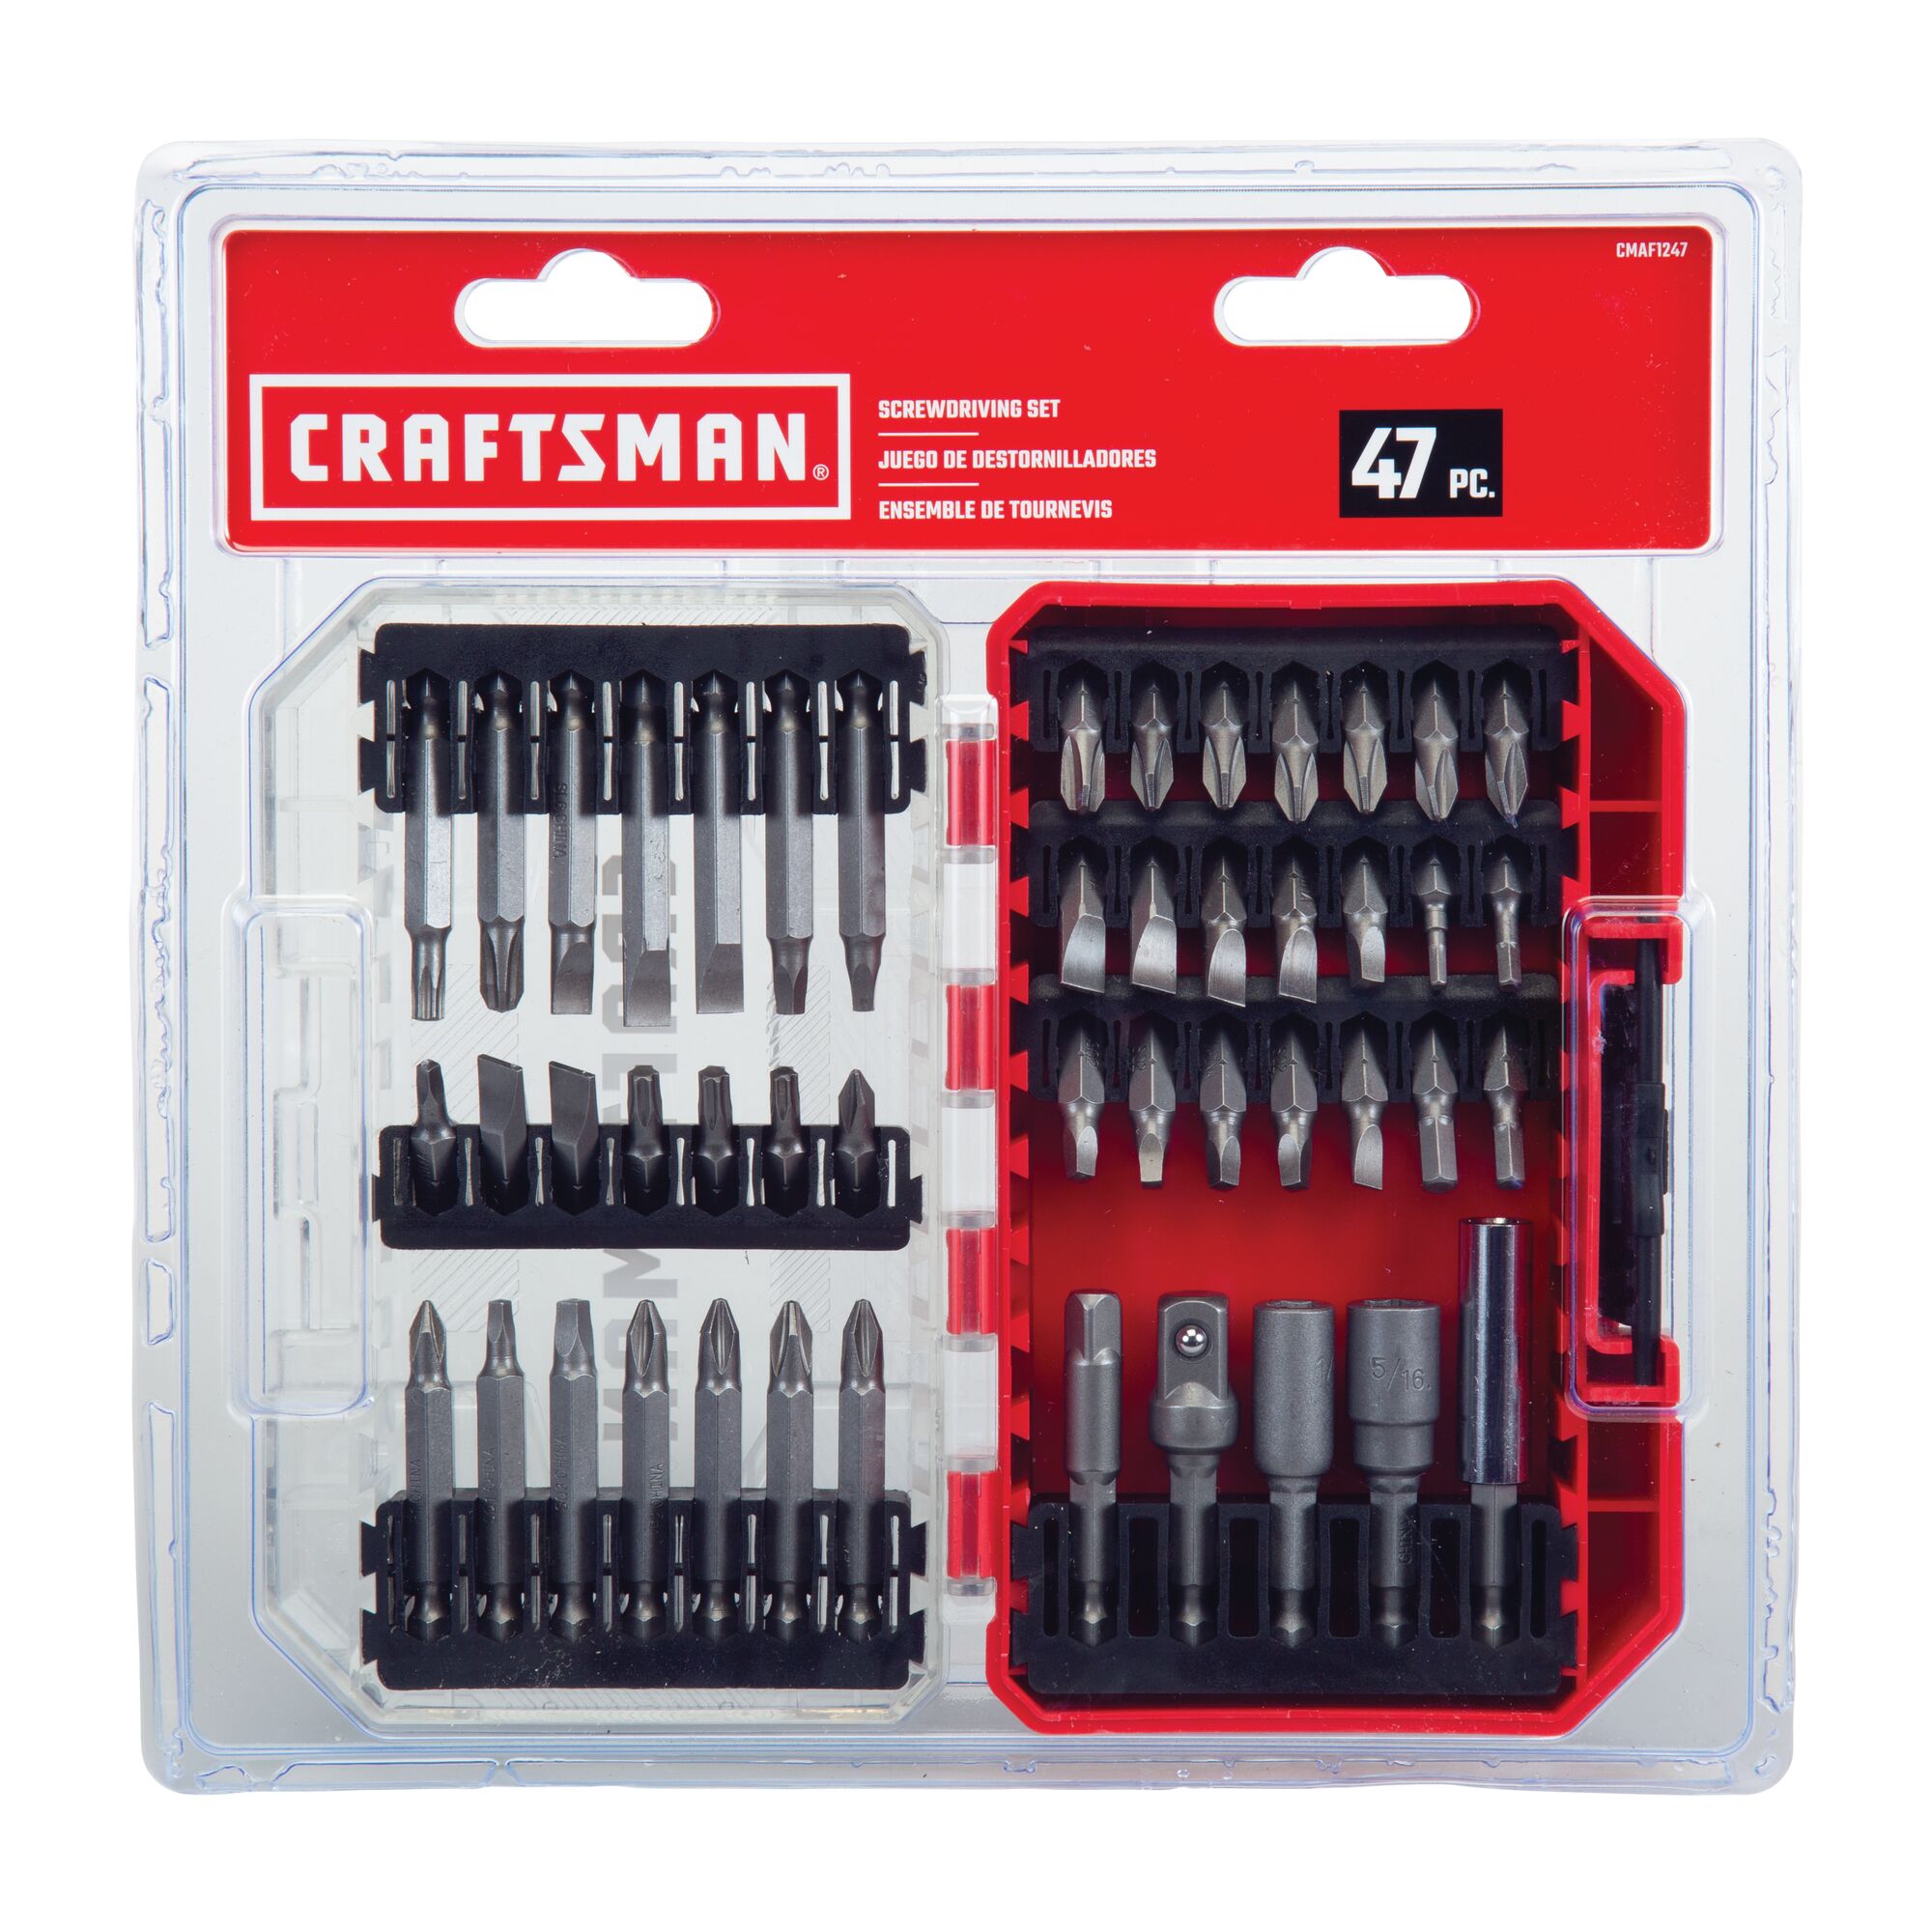 47 Piece SCREWDRIVING SET in blister packaging.